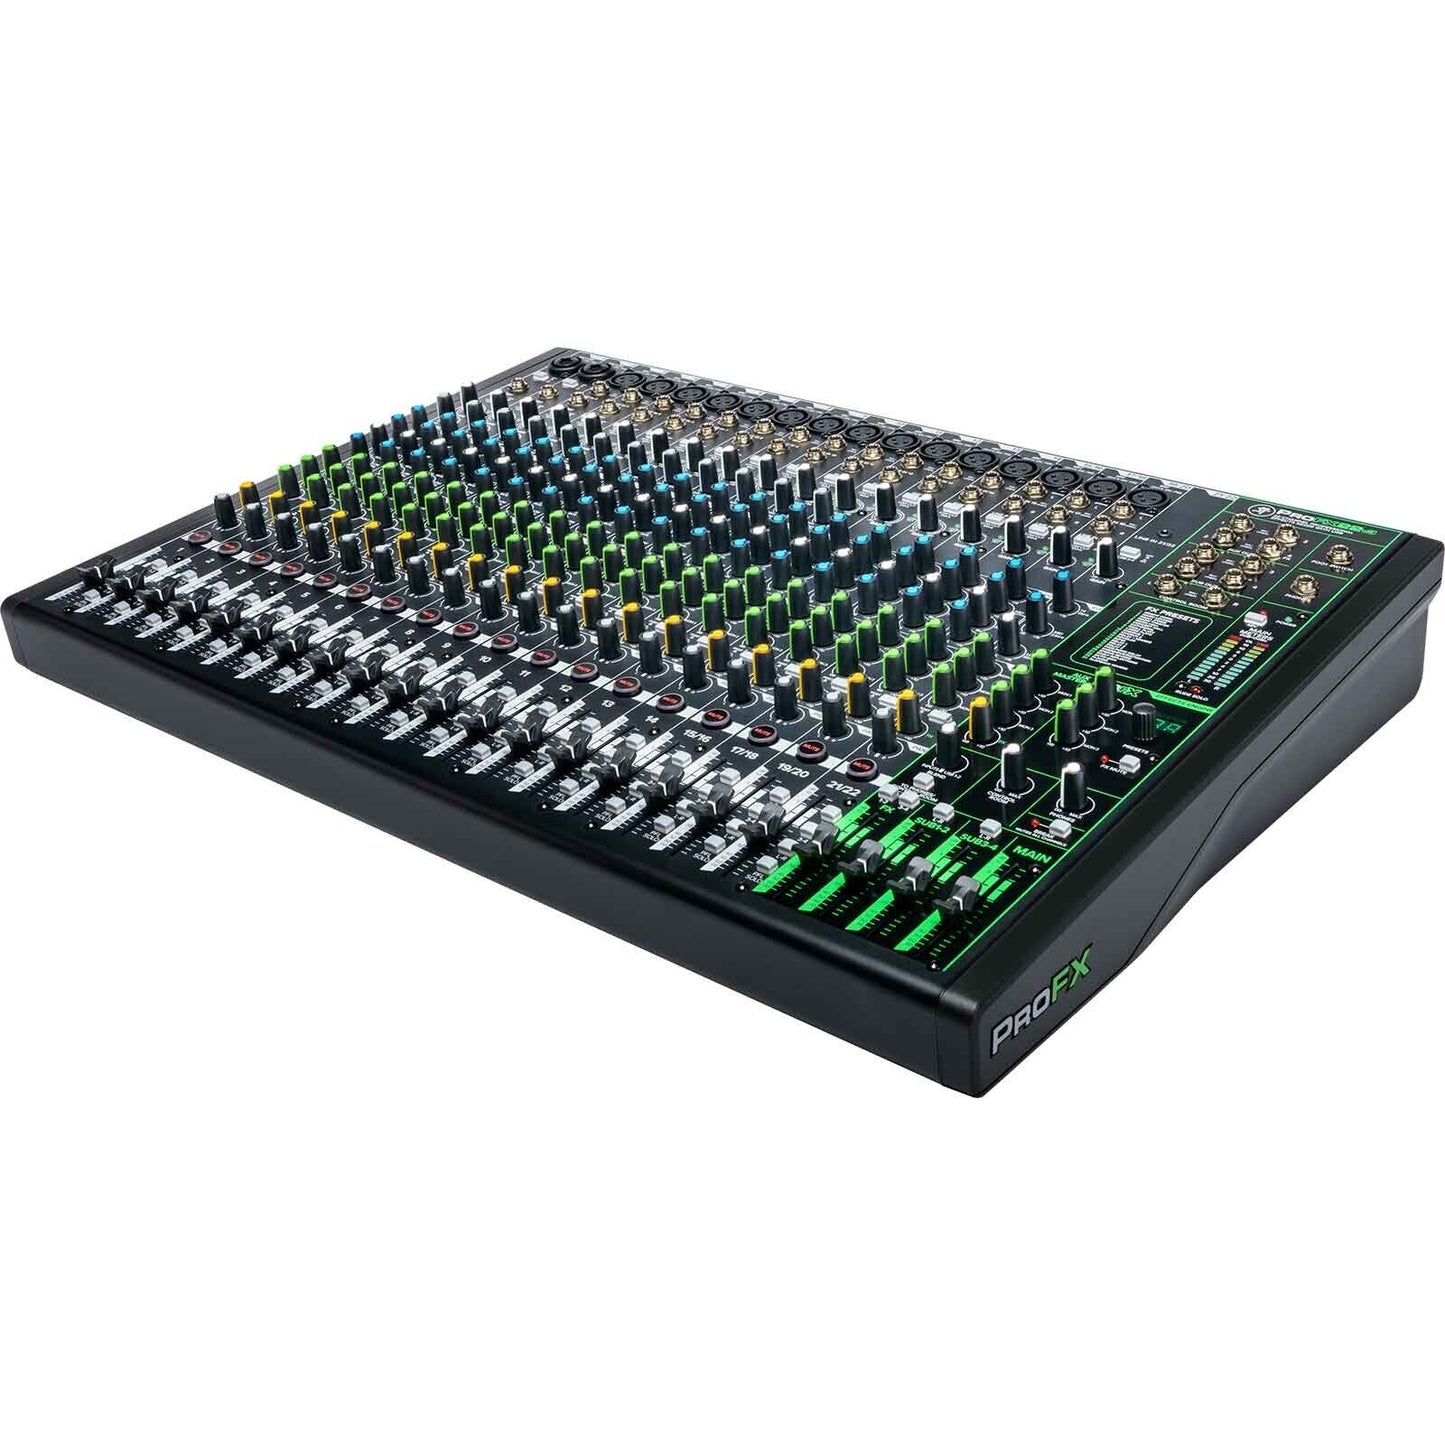 New - Mackie ProFX22v3 22-channel Mixer with USB and Effects